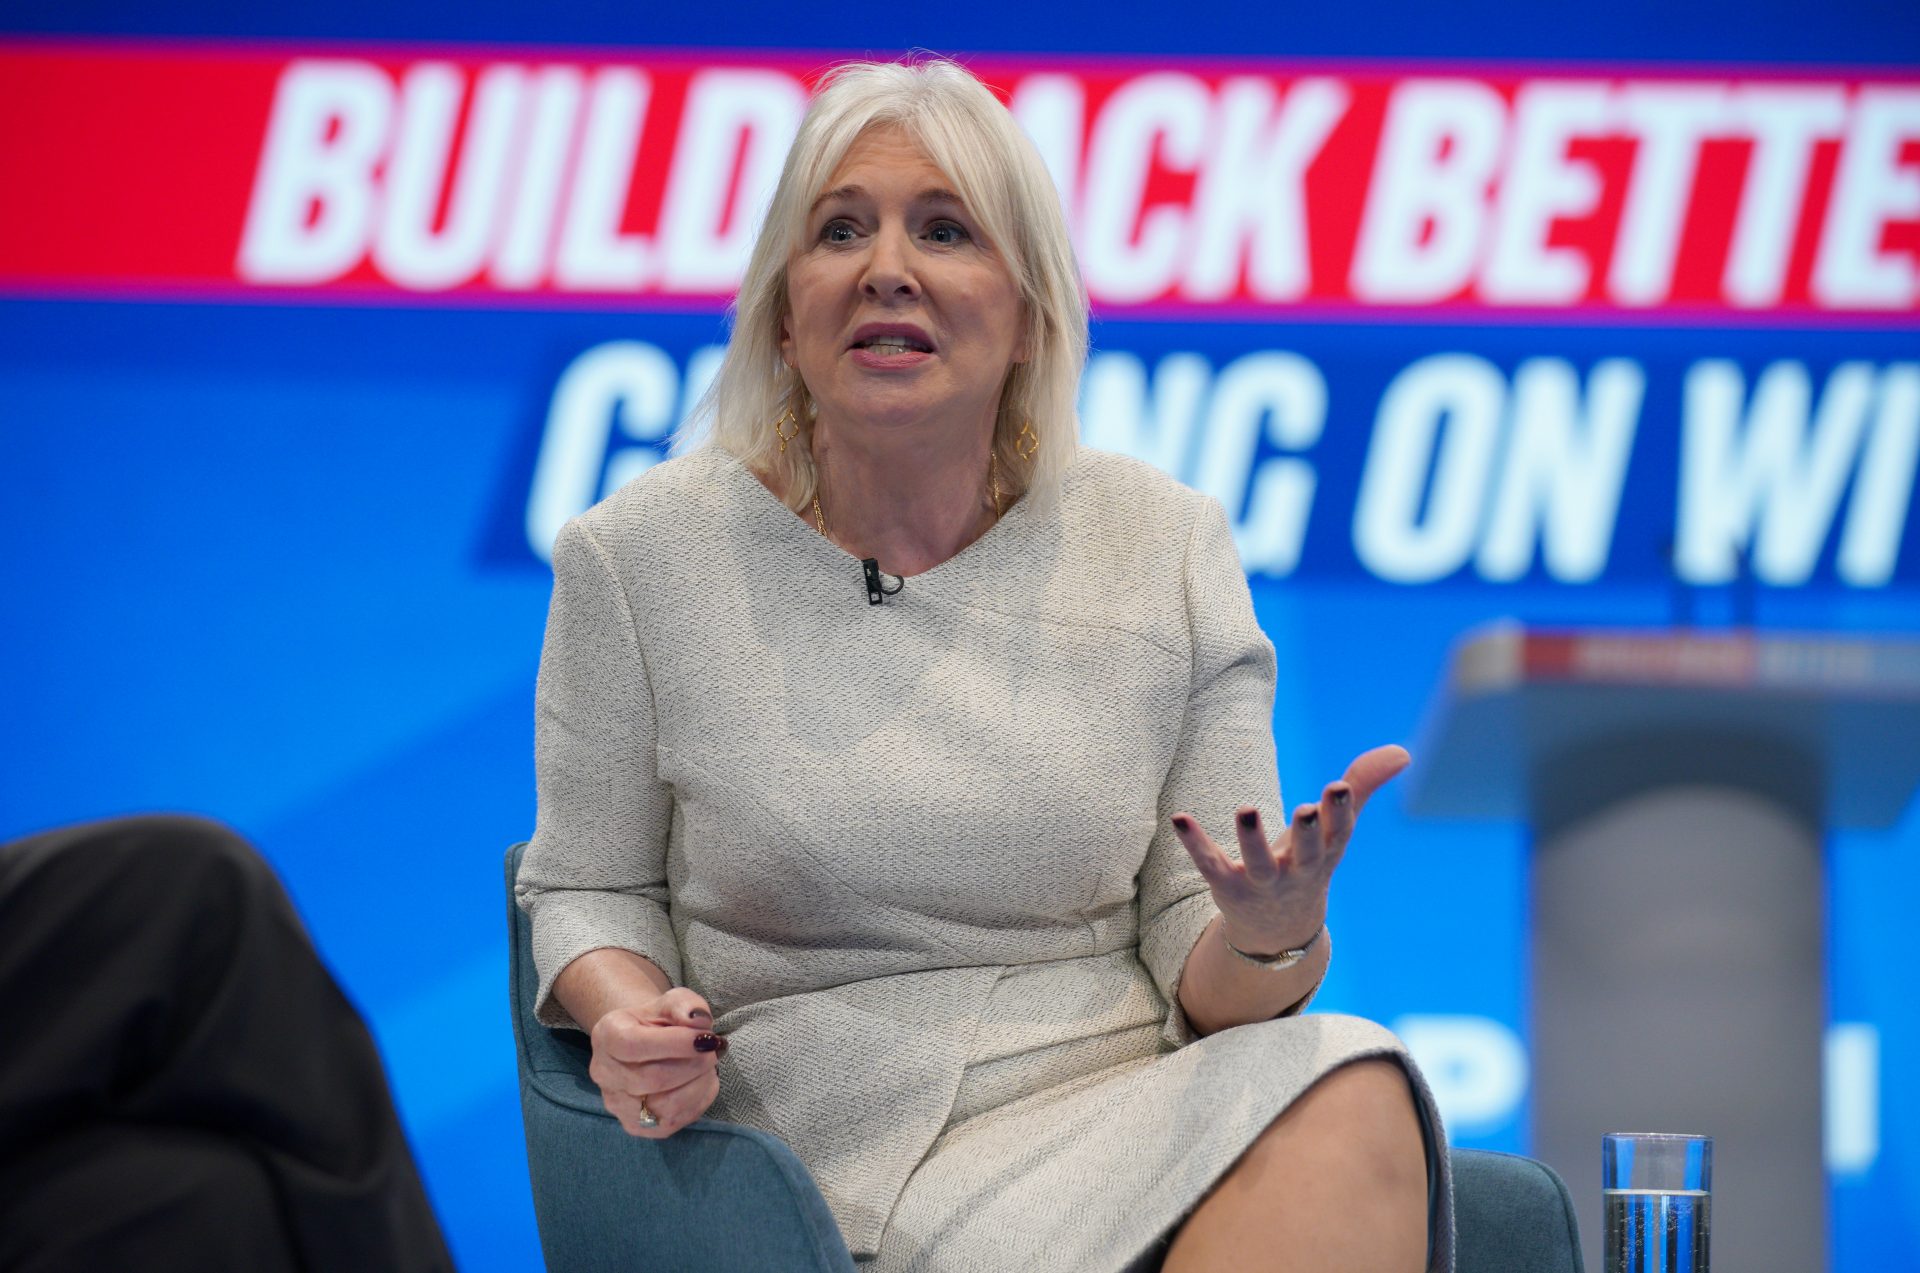 Culture Secretary Nadine Dorries on the main stage during the Conservative Party Conference. Photo: Peter Byrne/PA Wire/PA Images